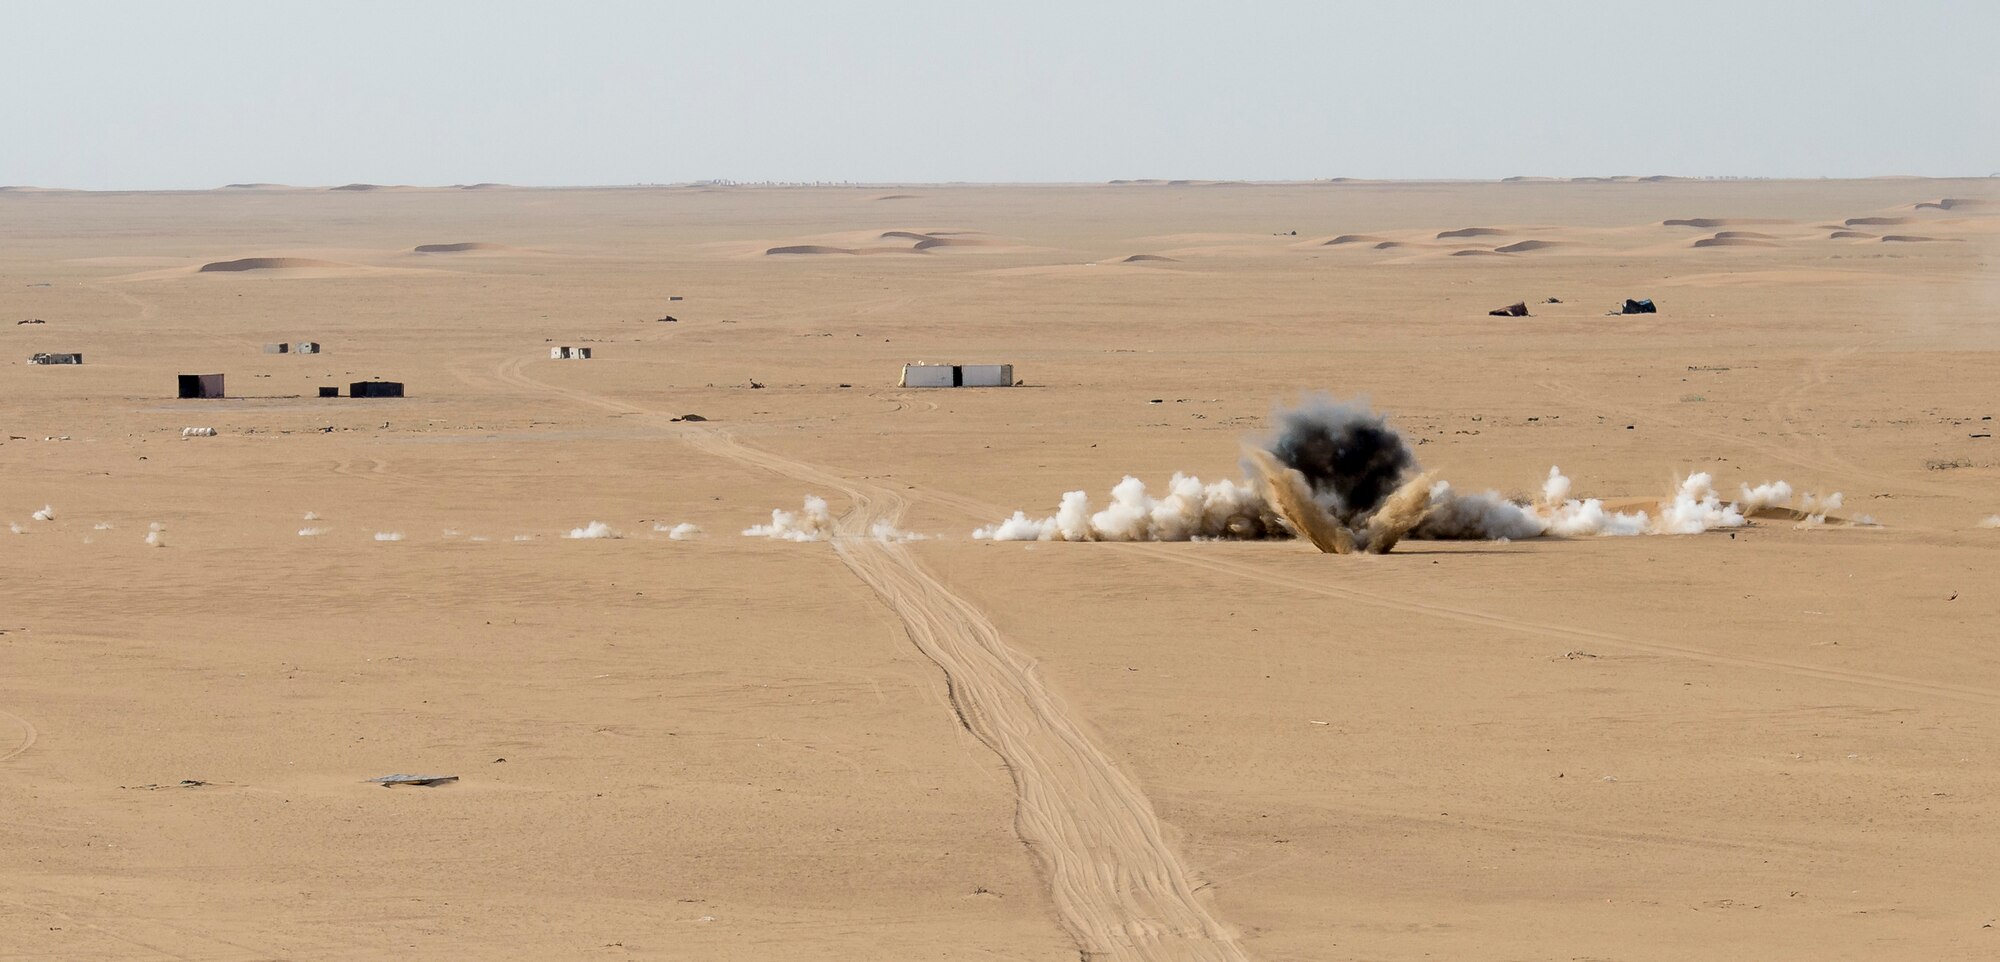 A 155mm howitzer round explodes as it hits its target during a Joint Operations live fire exercise on May 7, 2014 at an undisclosed location in Southwest Asia. The operation consisted of Army, Air Force, and Navy personnel working together to conduct a coordinated strike against a single target. (U.S. Air Force photo by Staff Sgt. Jeremy Bowcock)